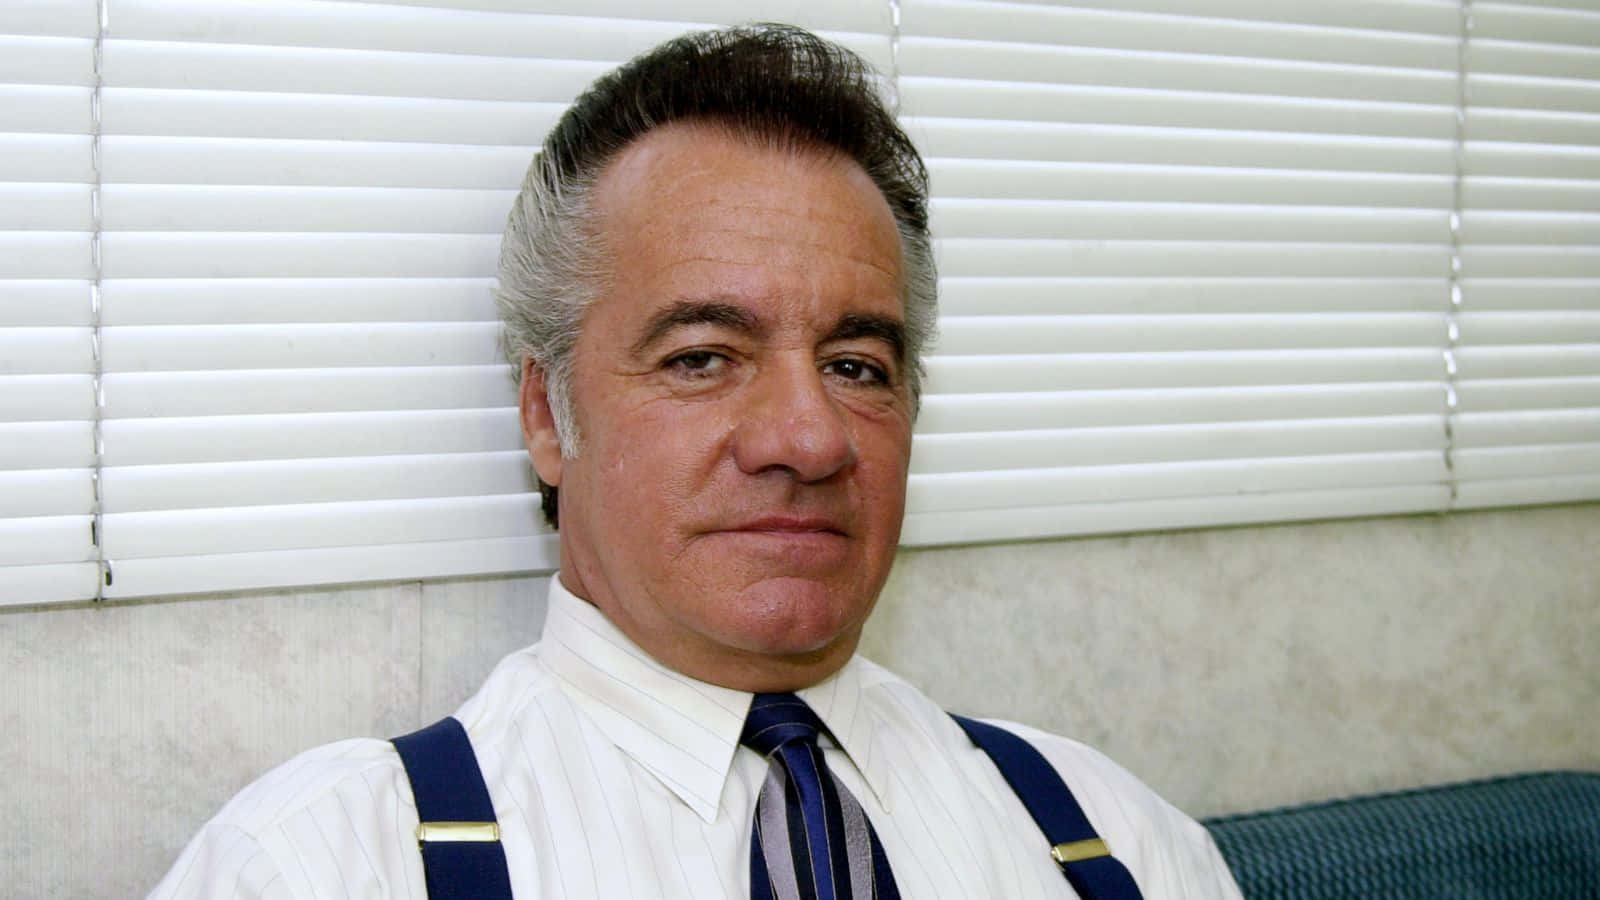 Tony Sirico, a legendary actor from The Sopranos, with a compelling gaze. Wallpaper